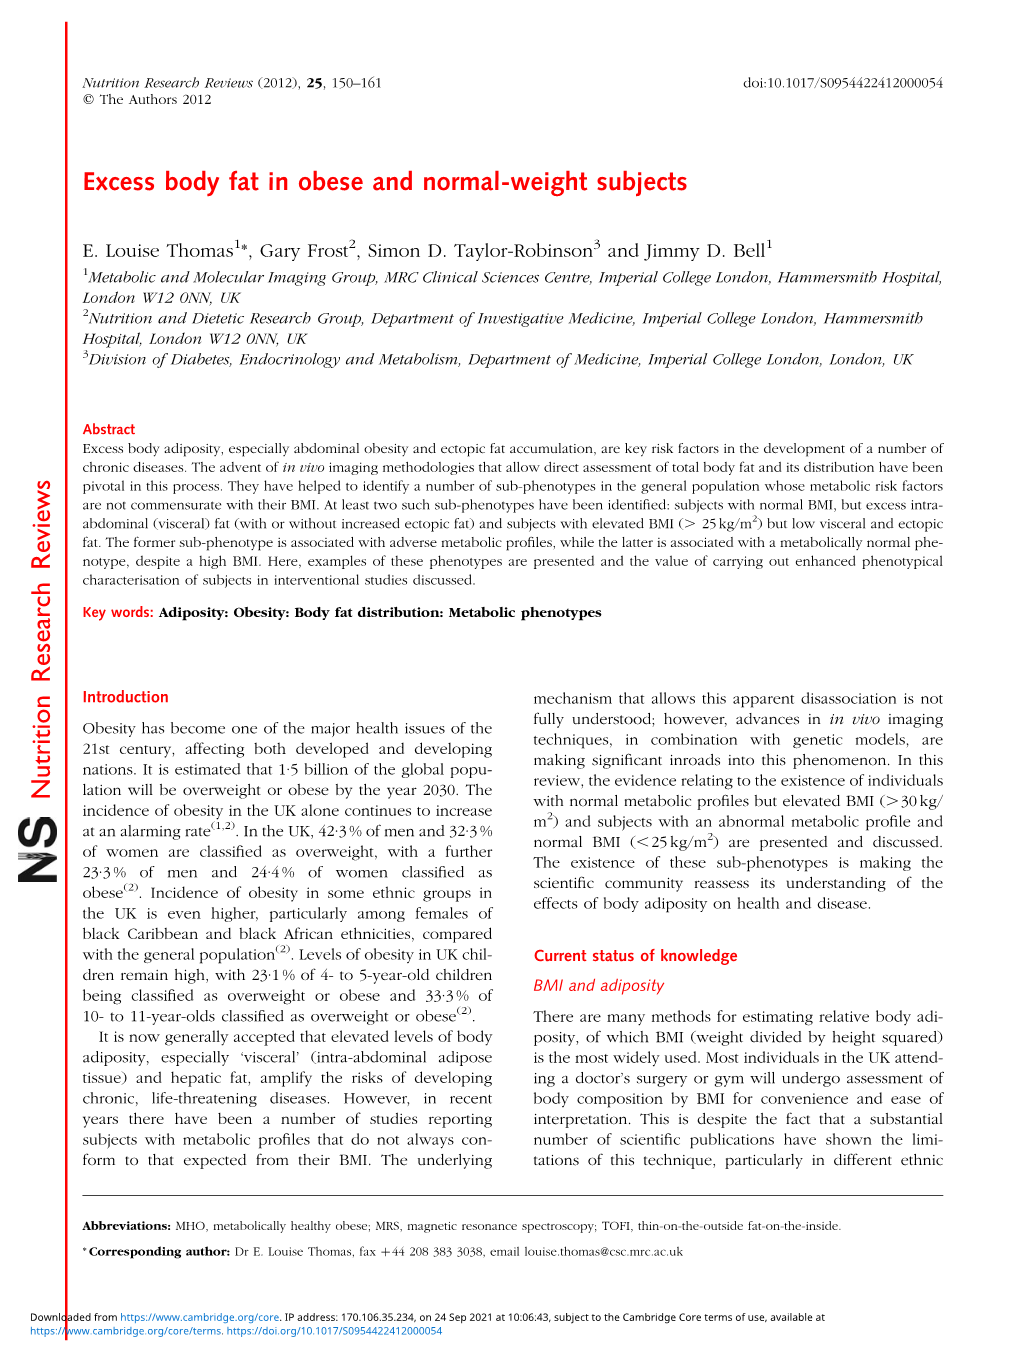 Excess Body Fat in Obese and Normal-Weight Subjects